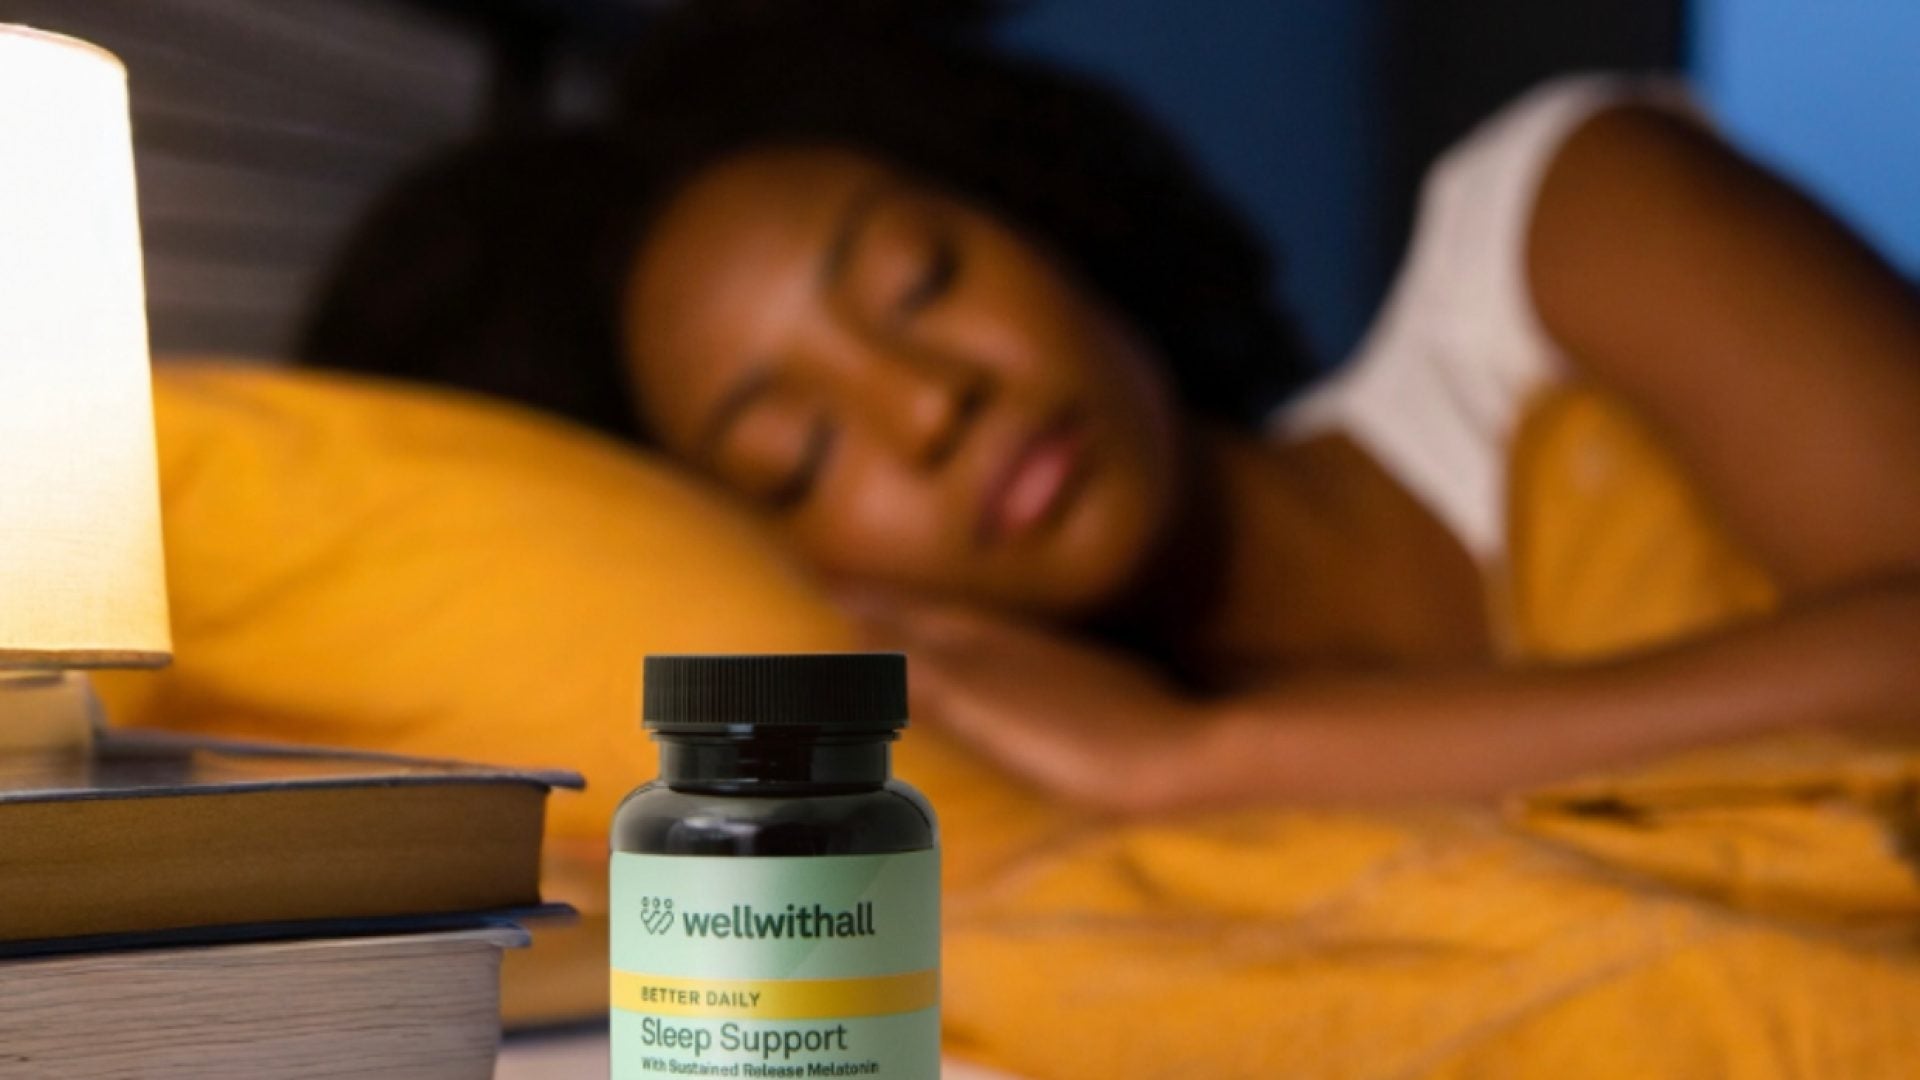 WellWithAll Is A Wellness Company Aiming To End Health Inequity For Black, Brown, And Underserved Communities